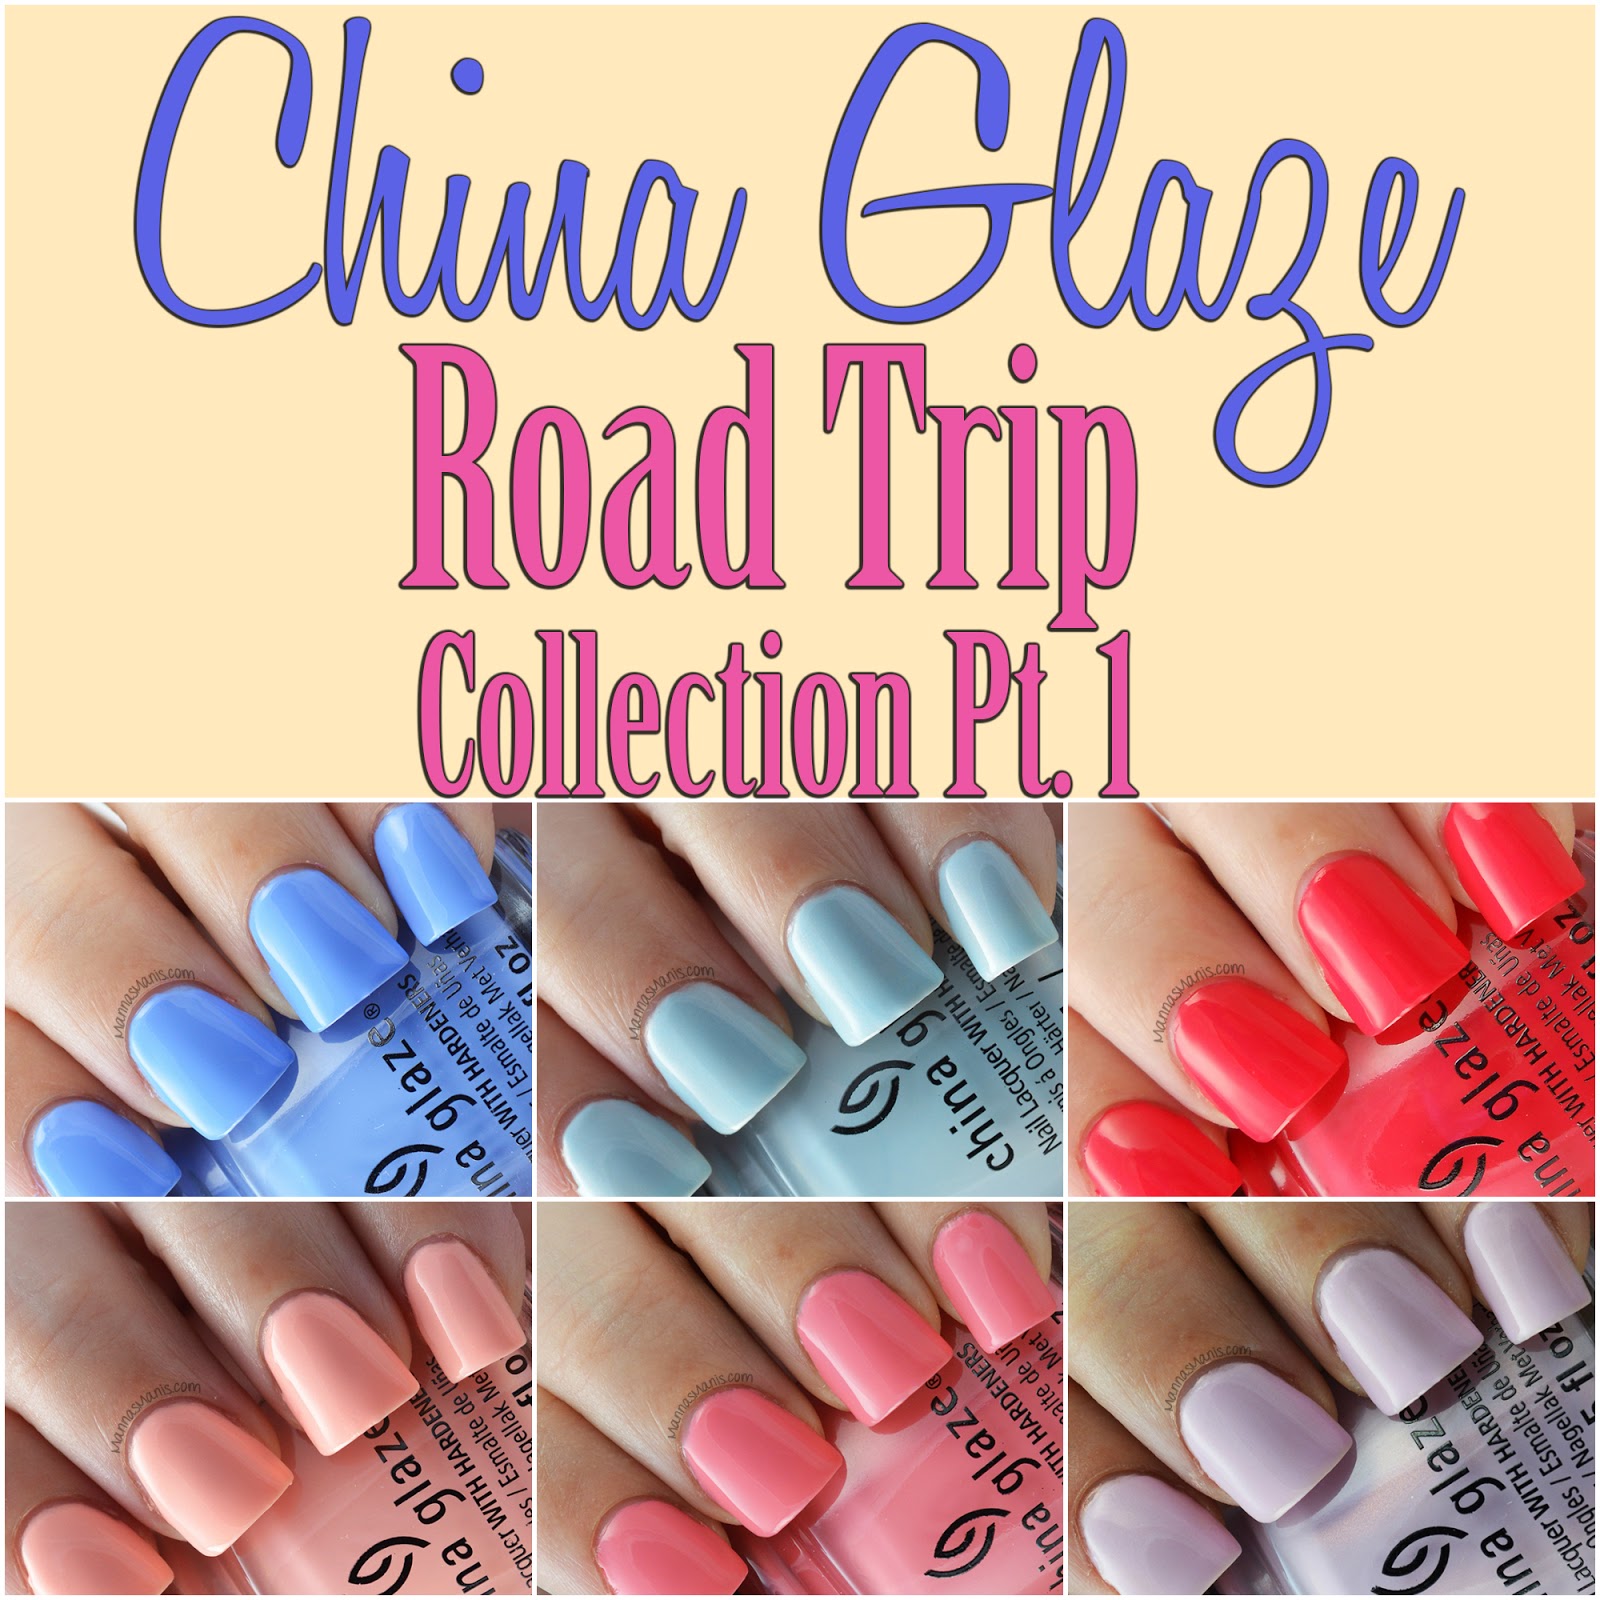 China Glaze Road Trip Collection swatches